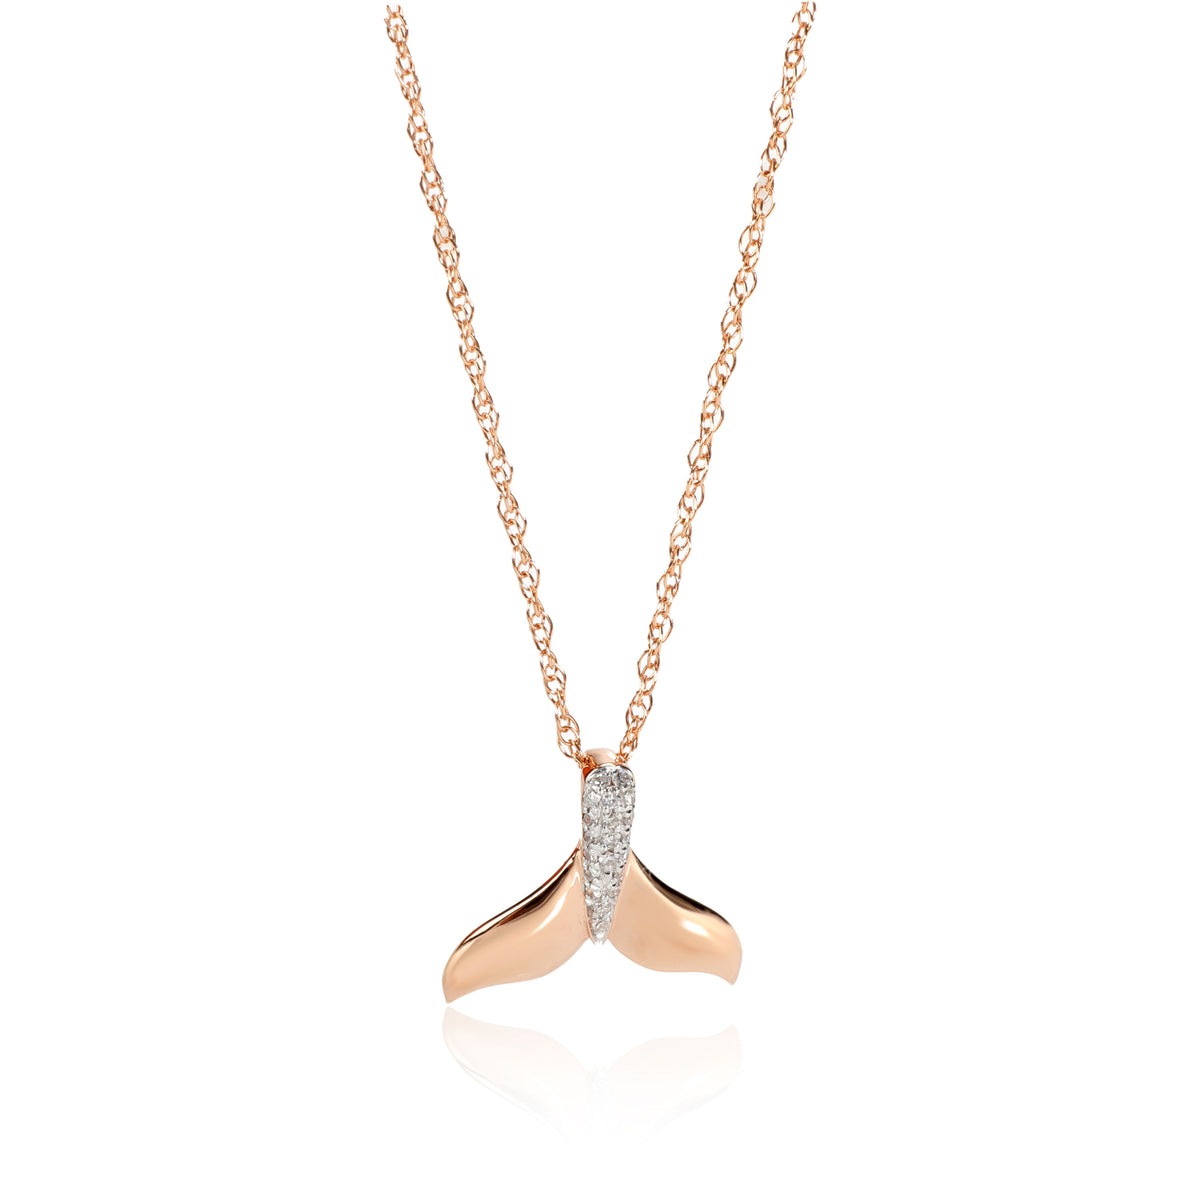 Diamond Dolphin Tail Pendant Necklace in 14K Rose Gold 0.06 ctw